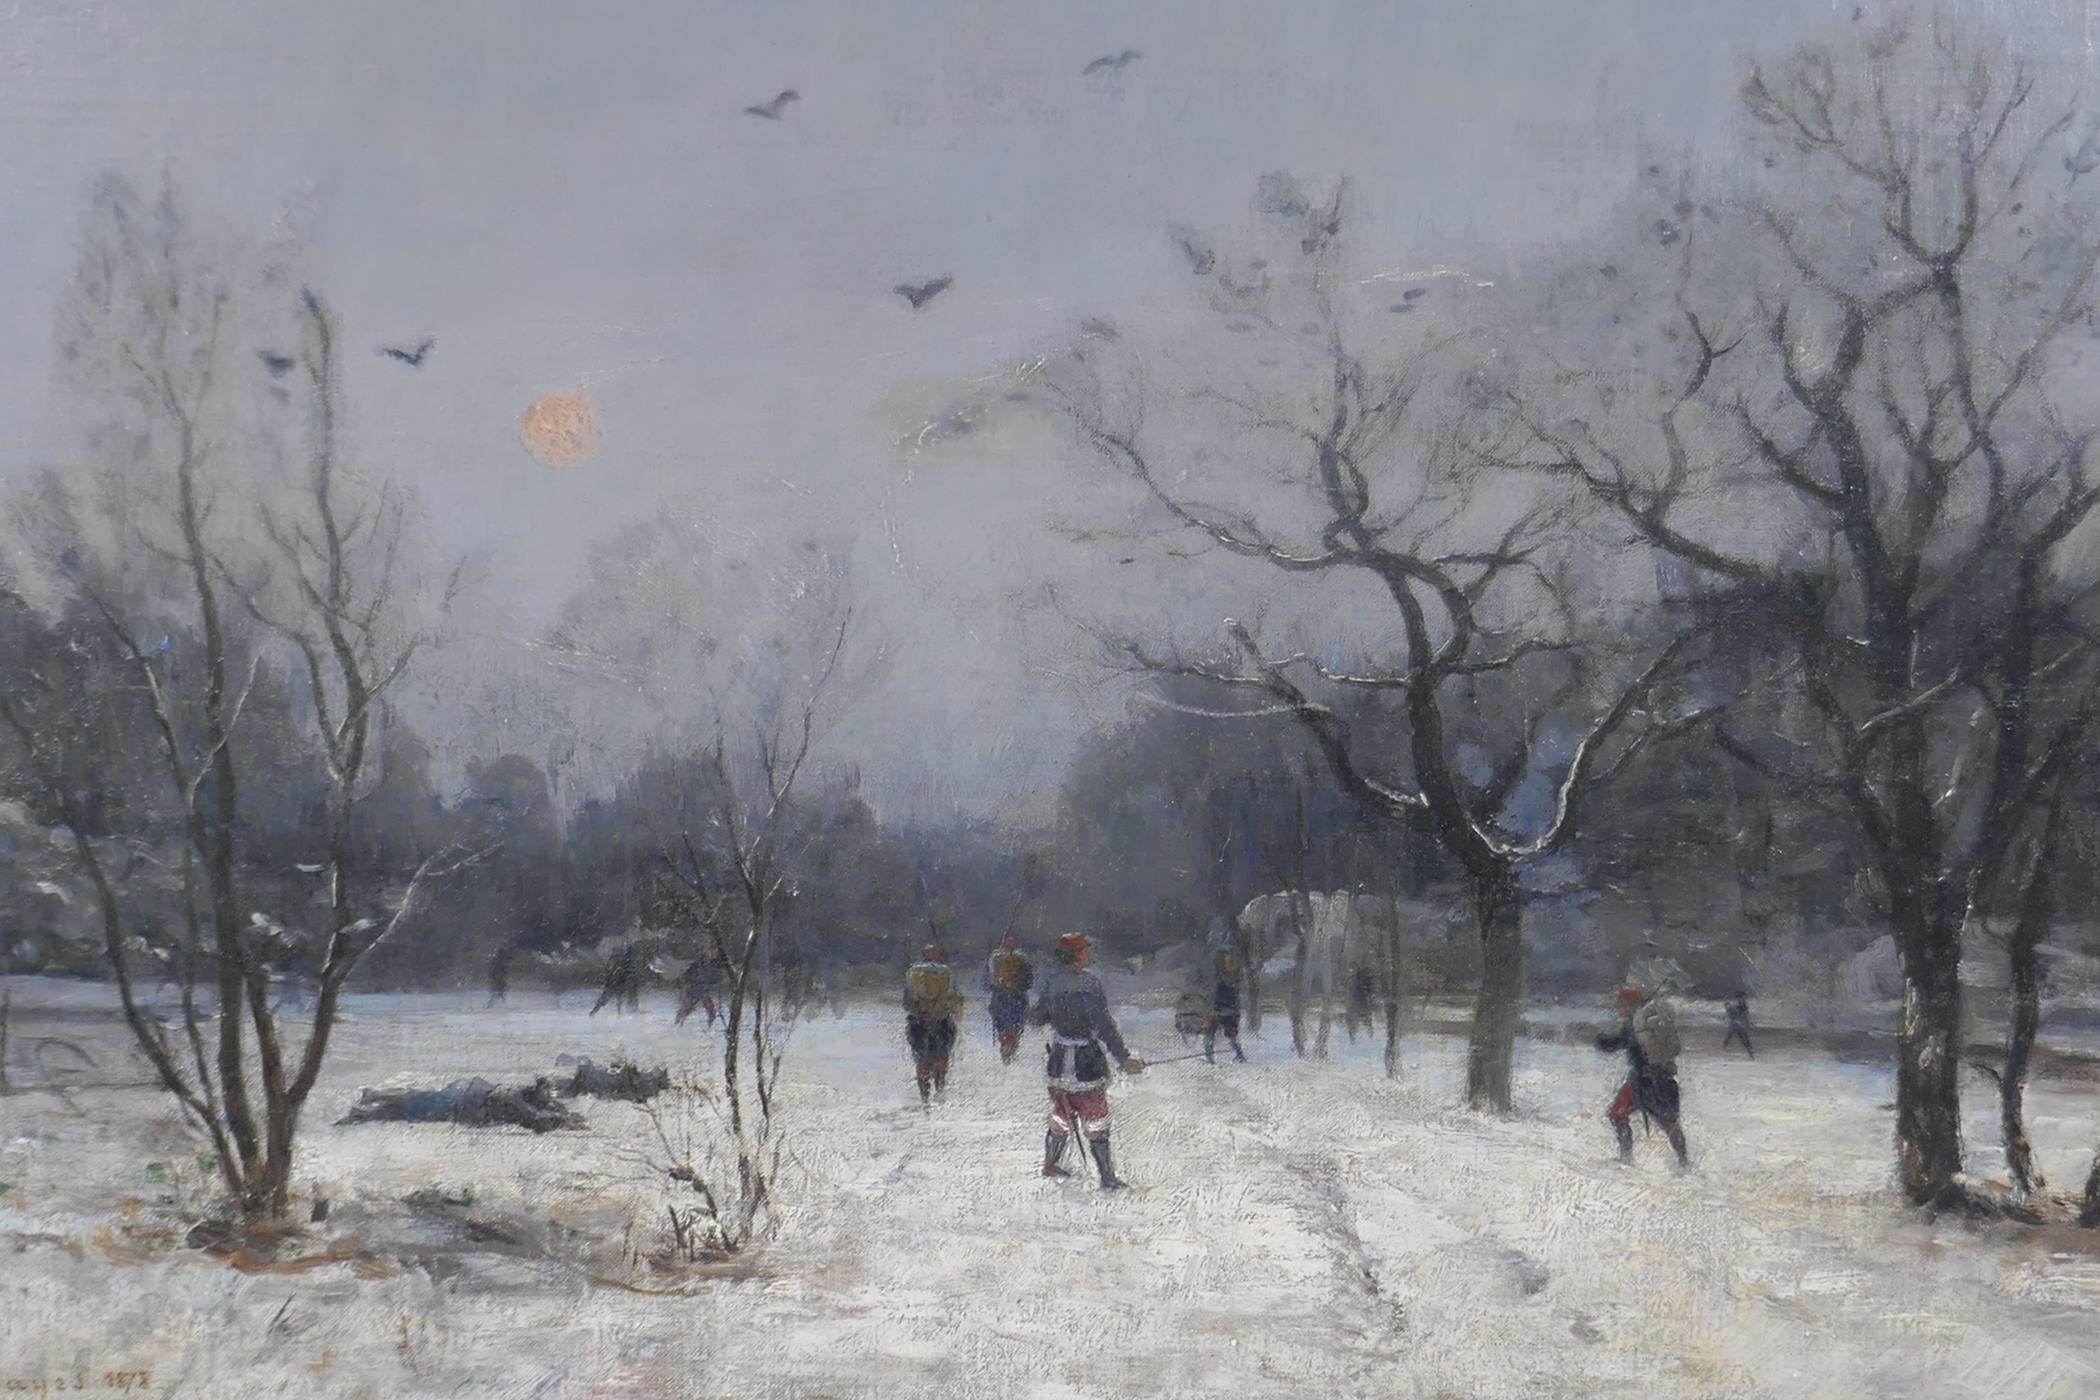 Charles Felix Edouard Deshayes, (French, 1831 - 1895), winter landscape with soldiers, 1878, oil